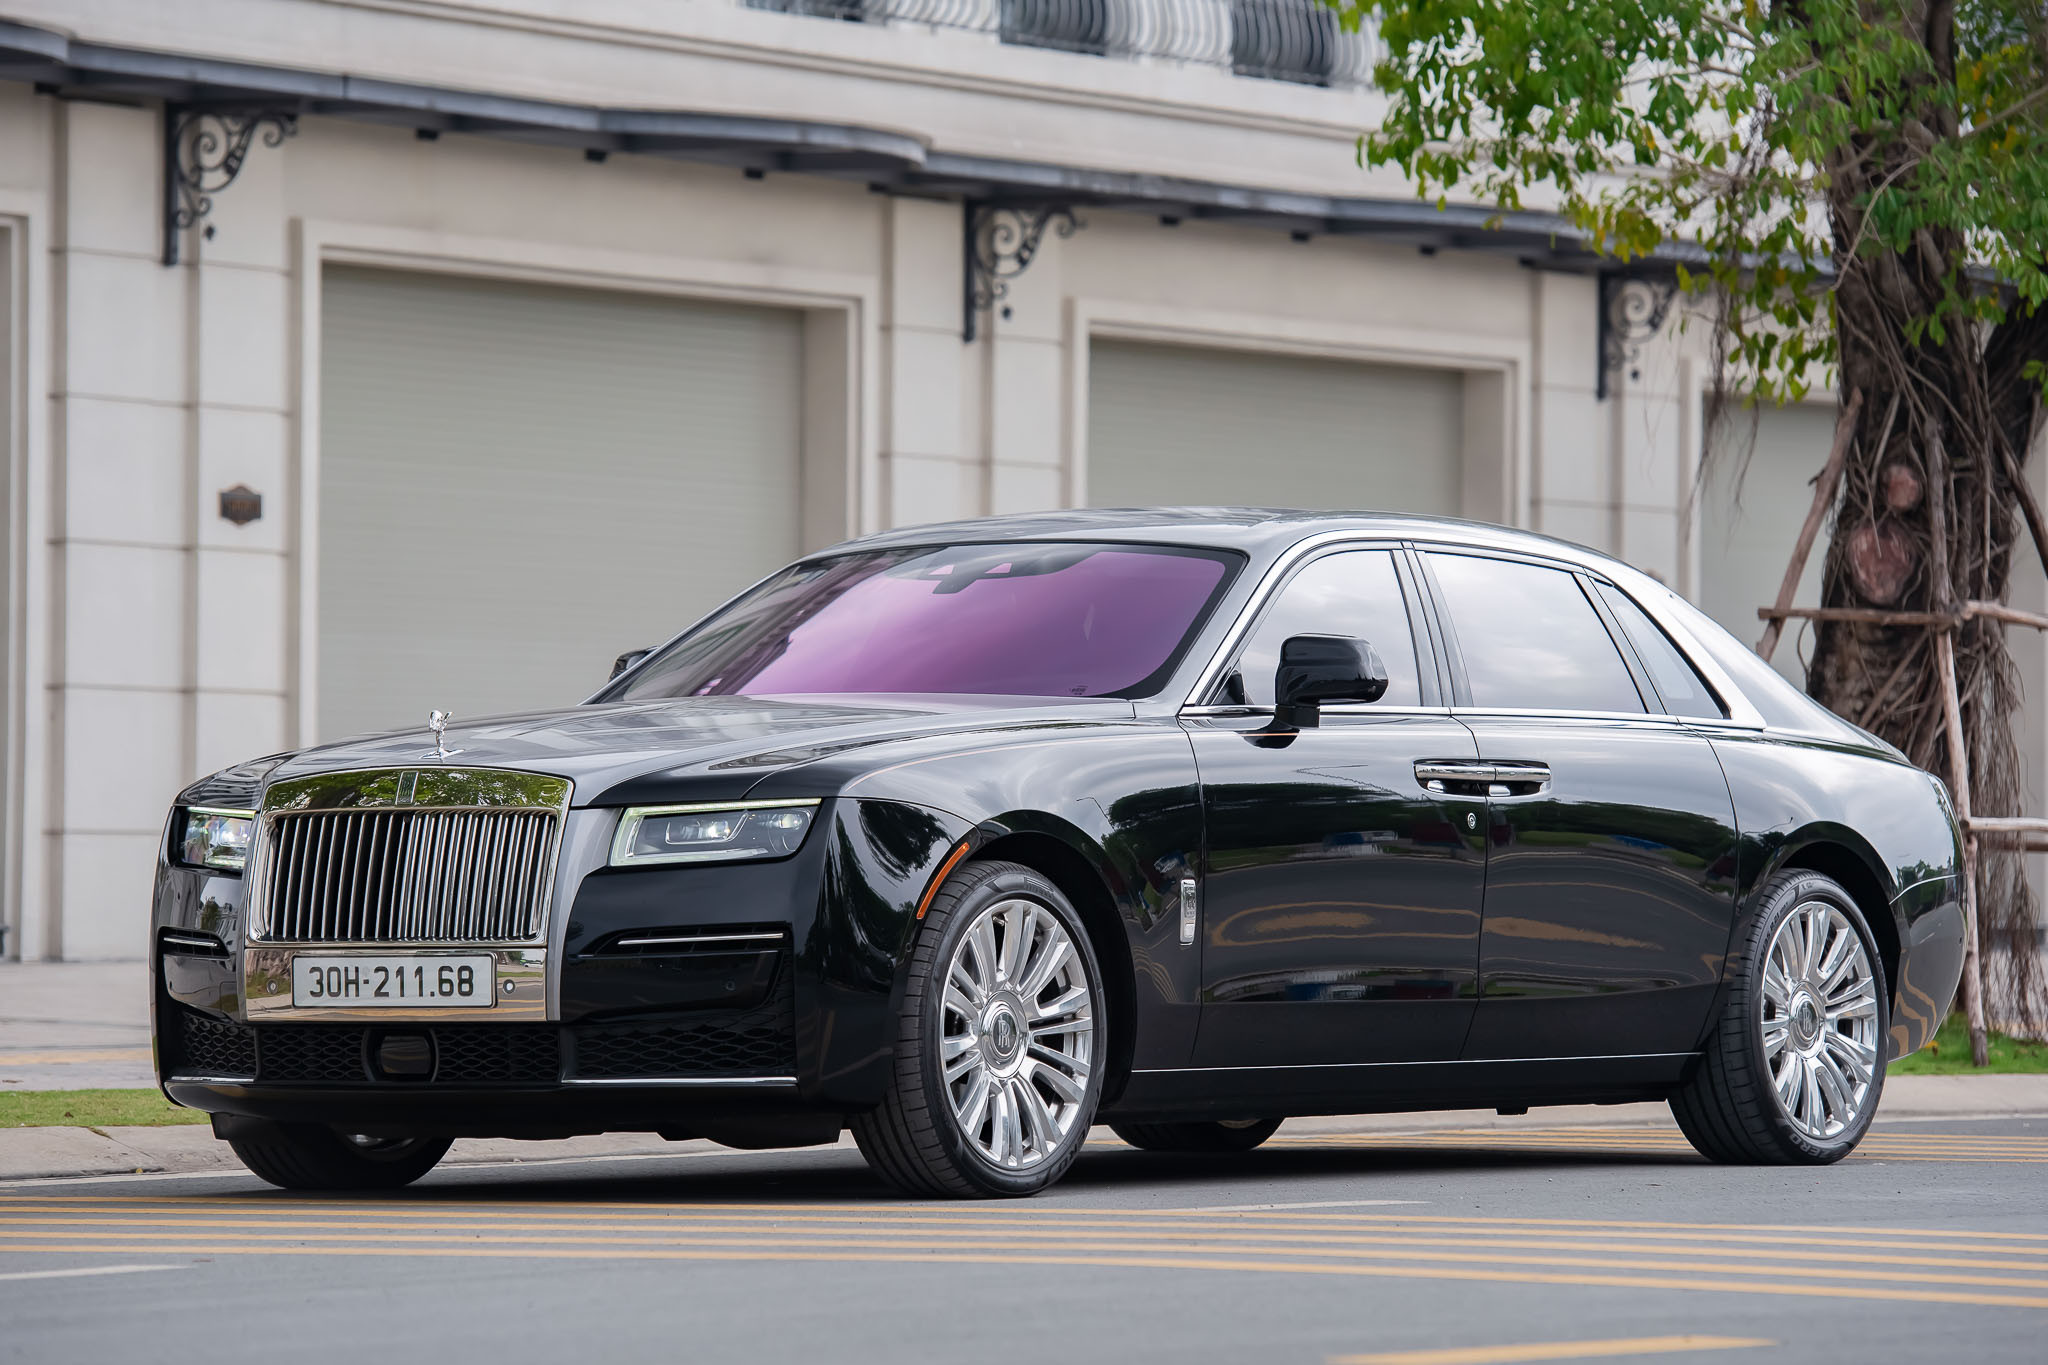 RollsRoyce unveils its firstever EV the Spectre  Online Car Marketplace  for Used  New Cars